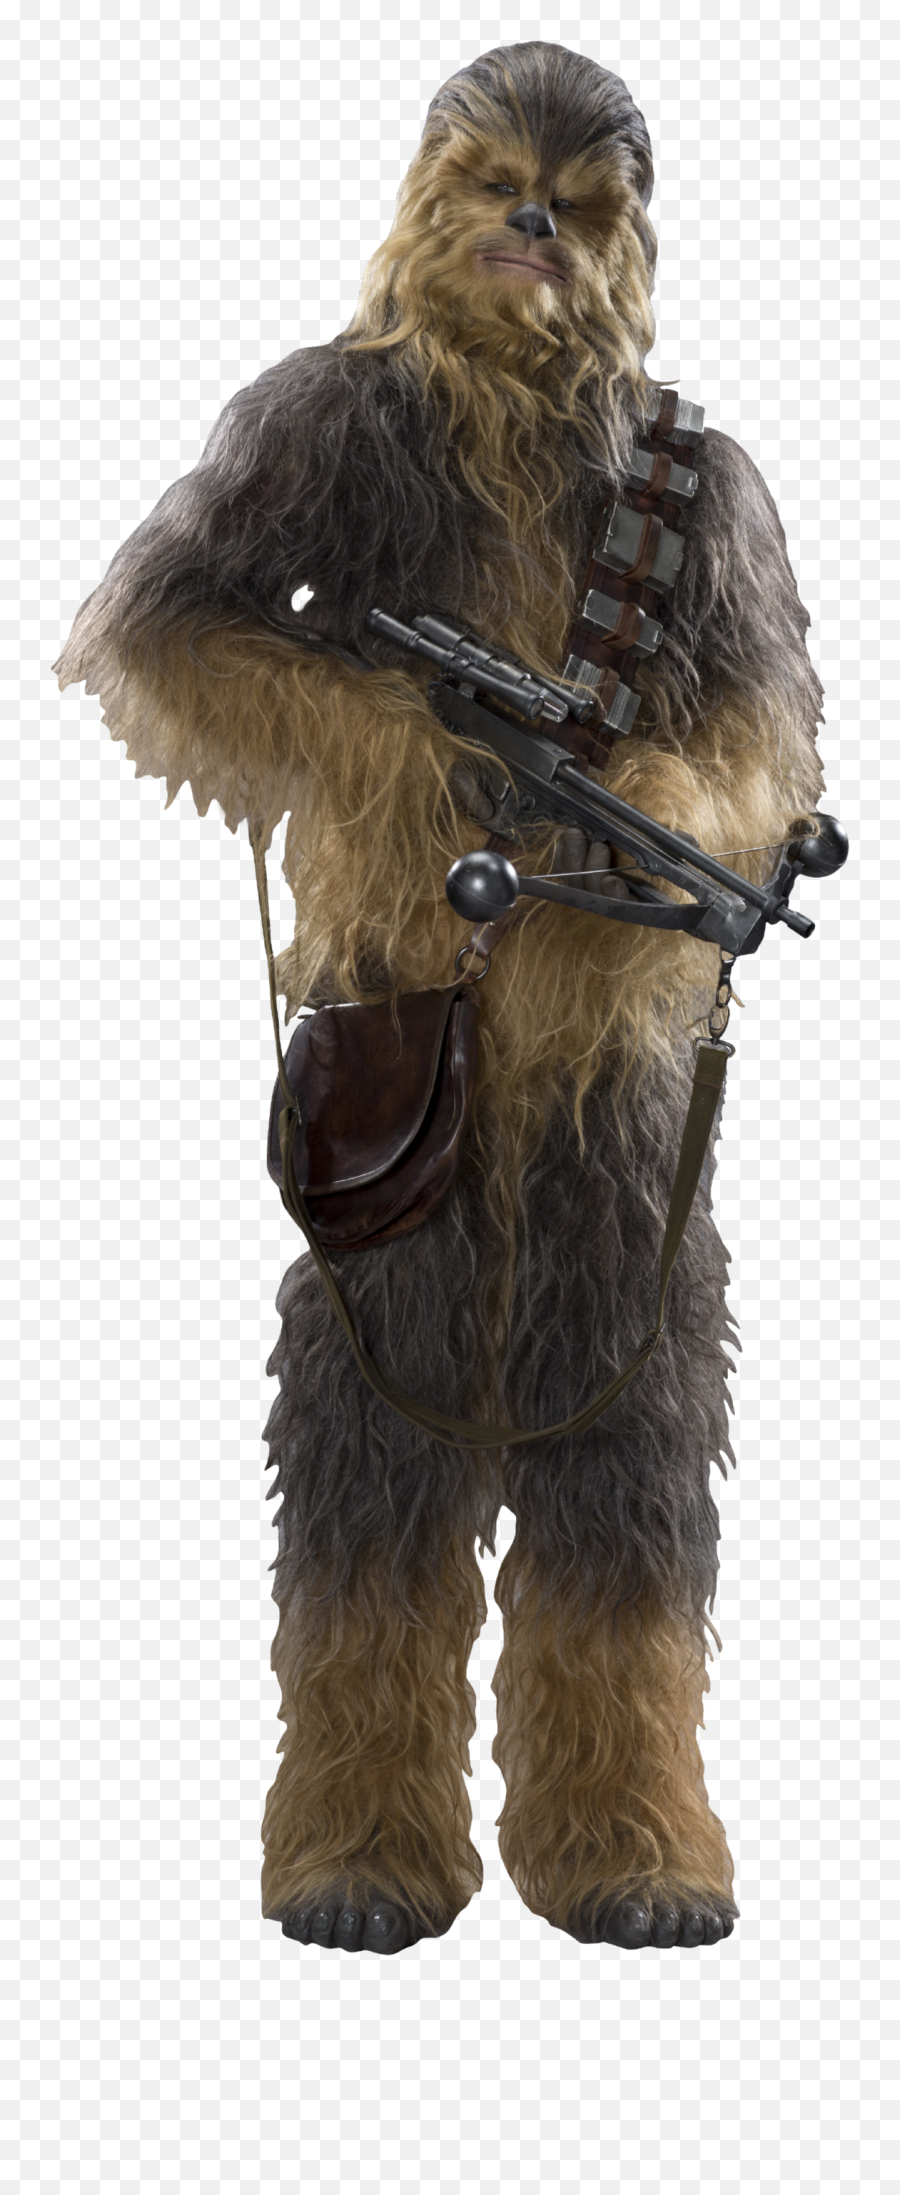 Download Chewbacca Png Clipart 140 - Star Wars Chewbacca Png,Chewbacca Png